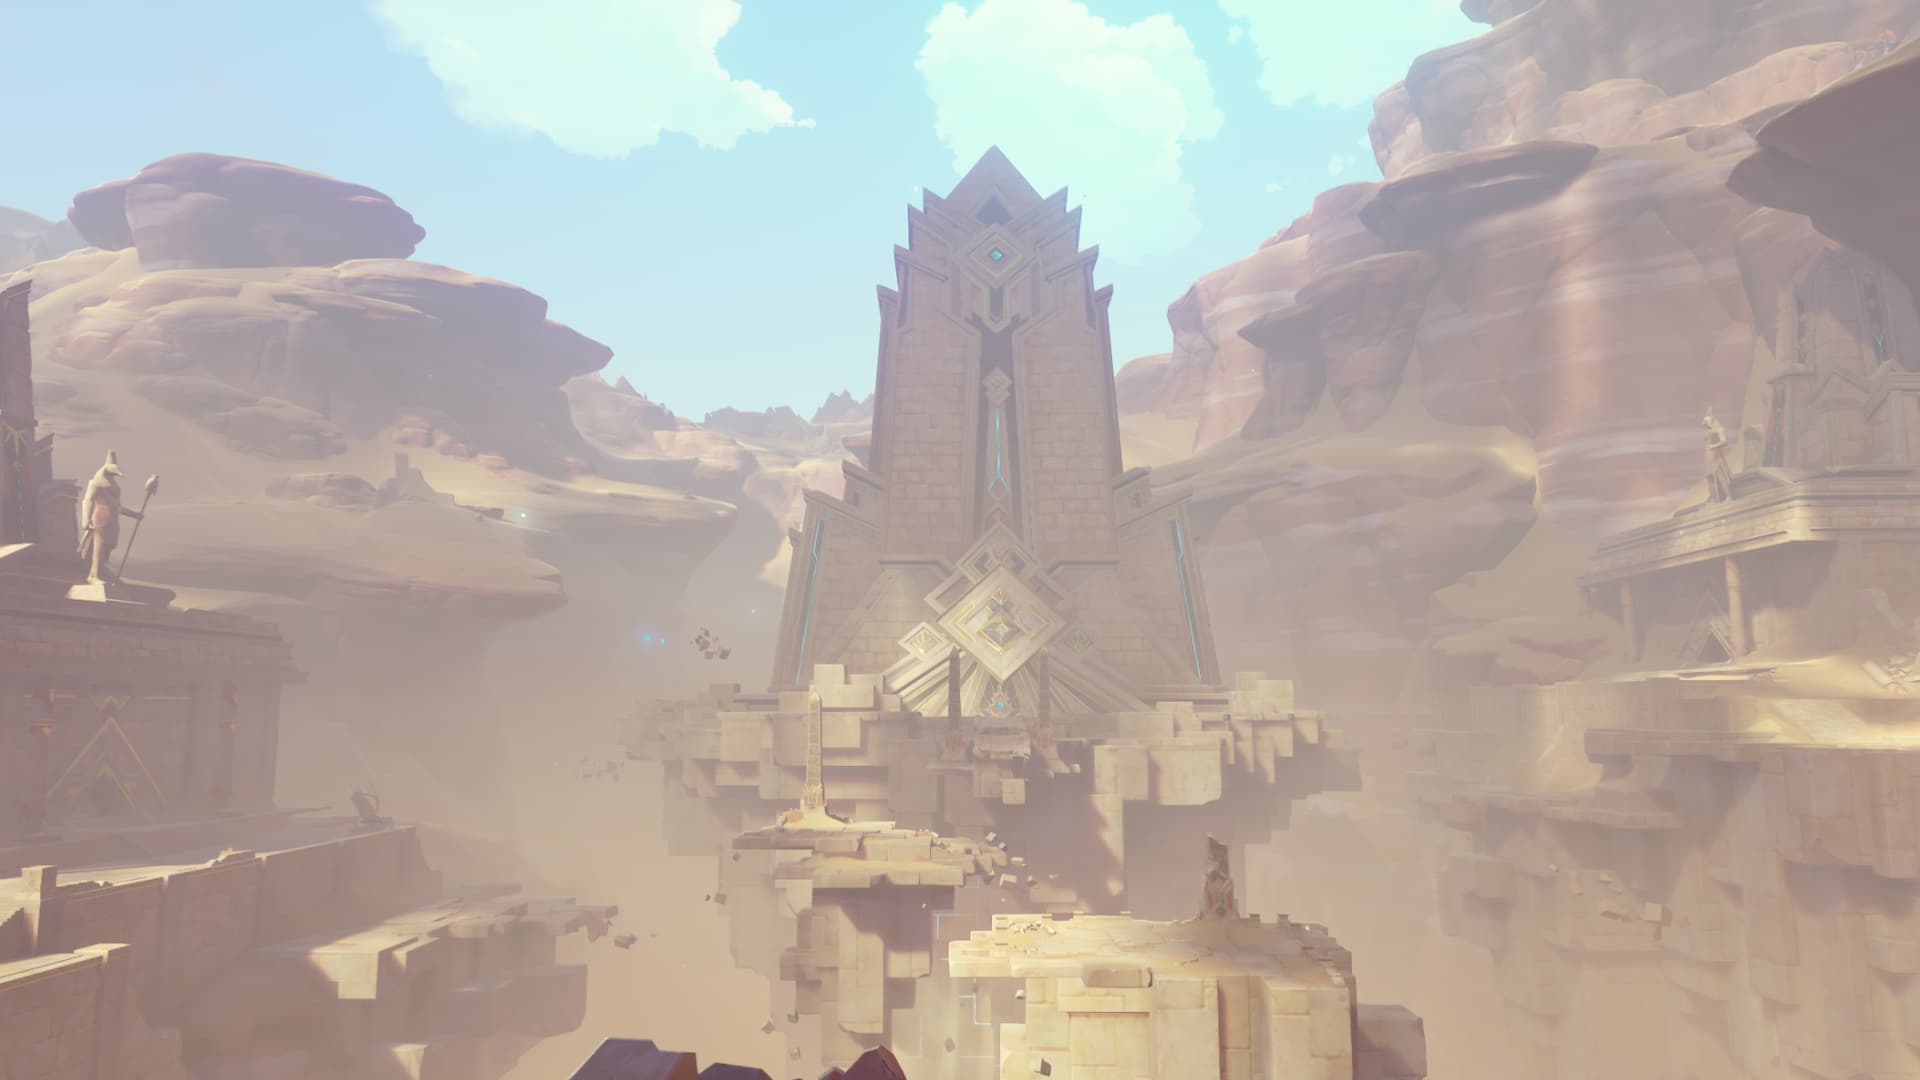 Genshin Impact 3.6 adds even more desert locations, according to leak: Large stone structure in desert